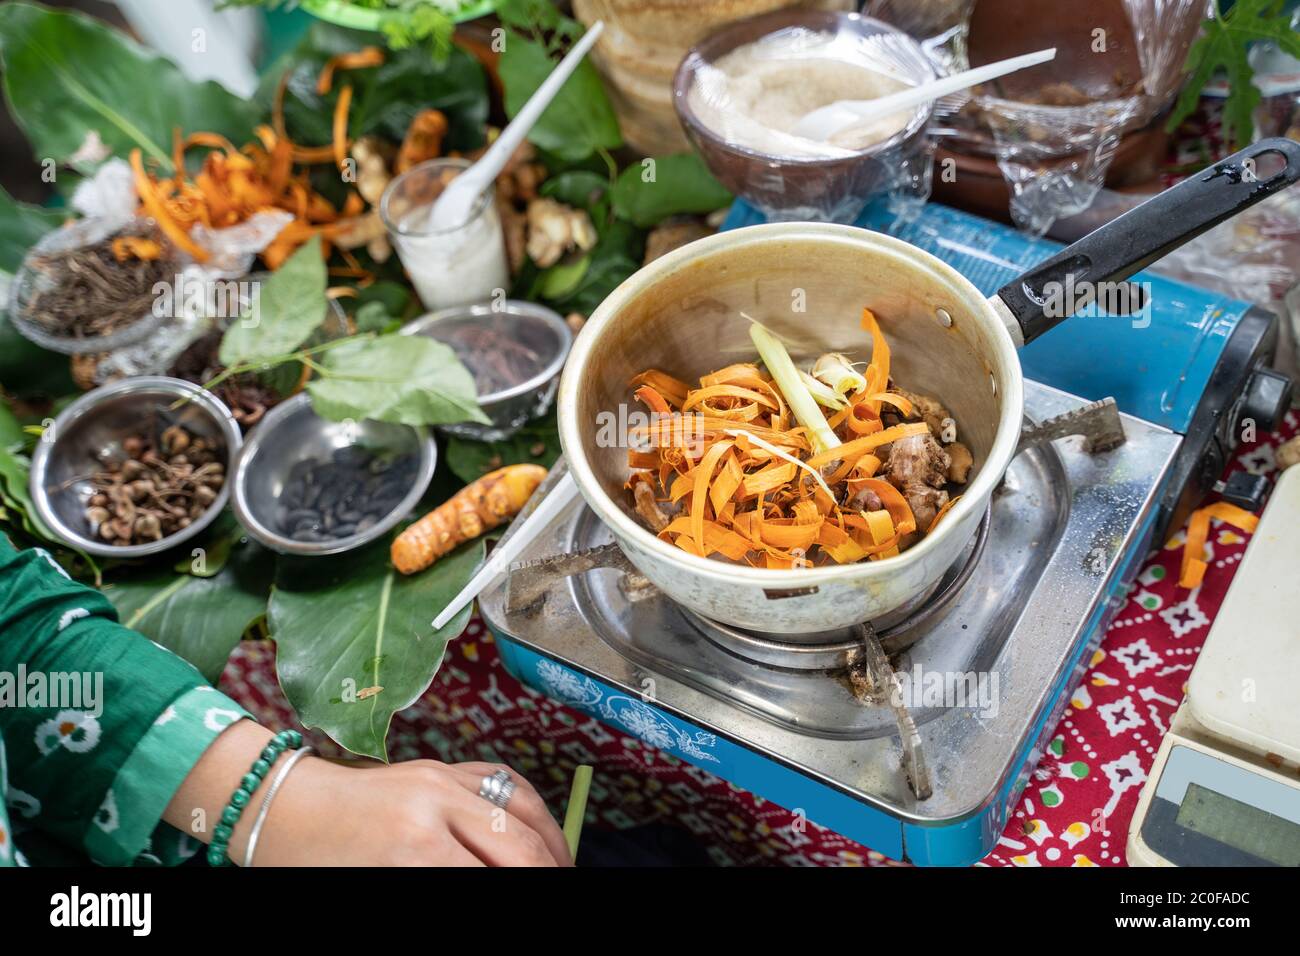 Traditional herbal drinks boiled with a pot and concoction of herbal medicine wedang uwuh Stock Photo